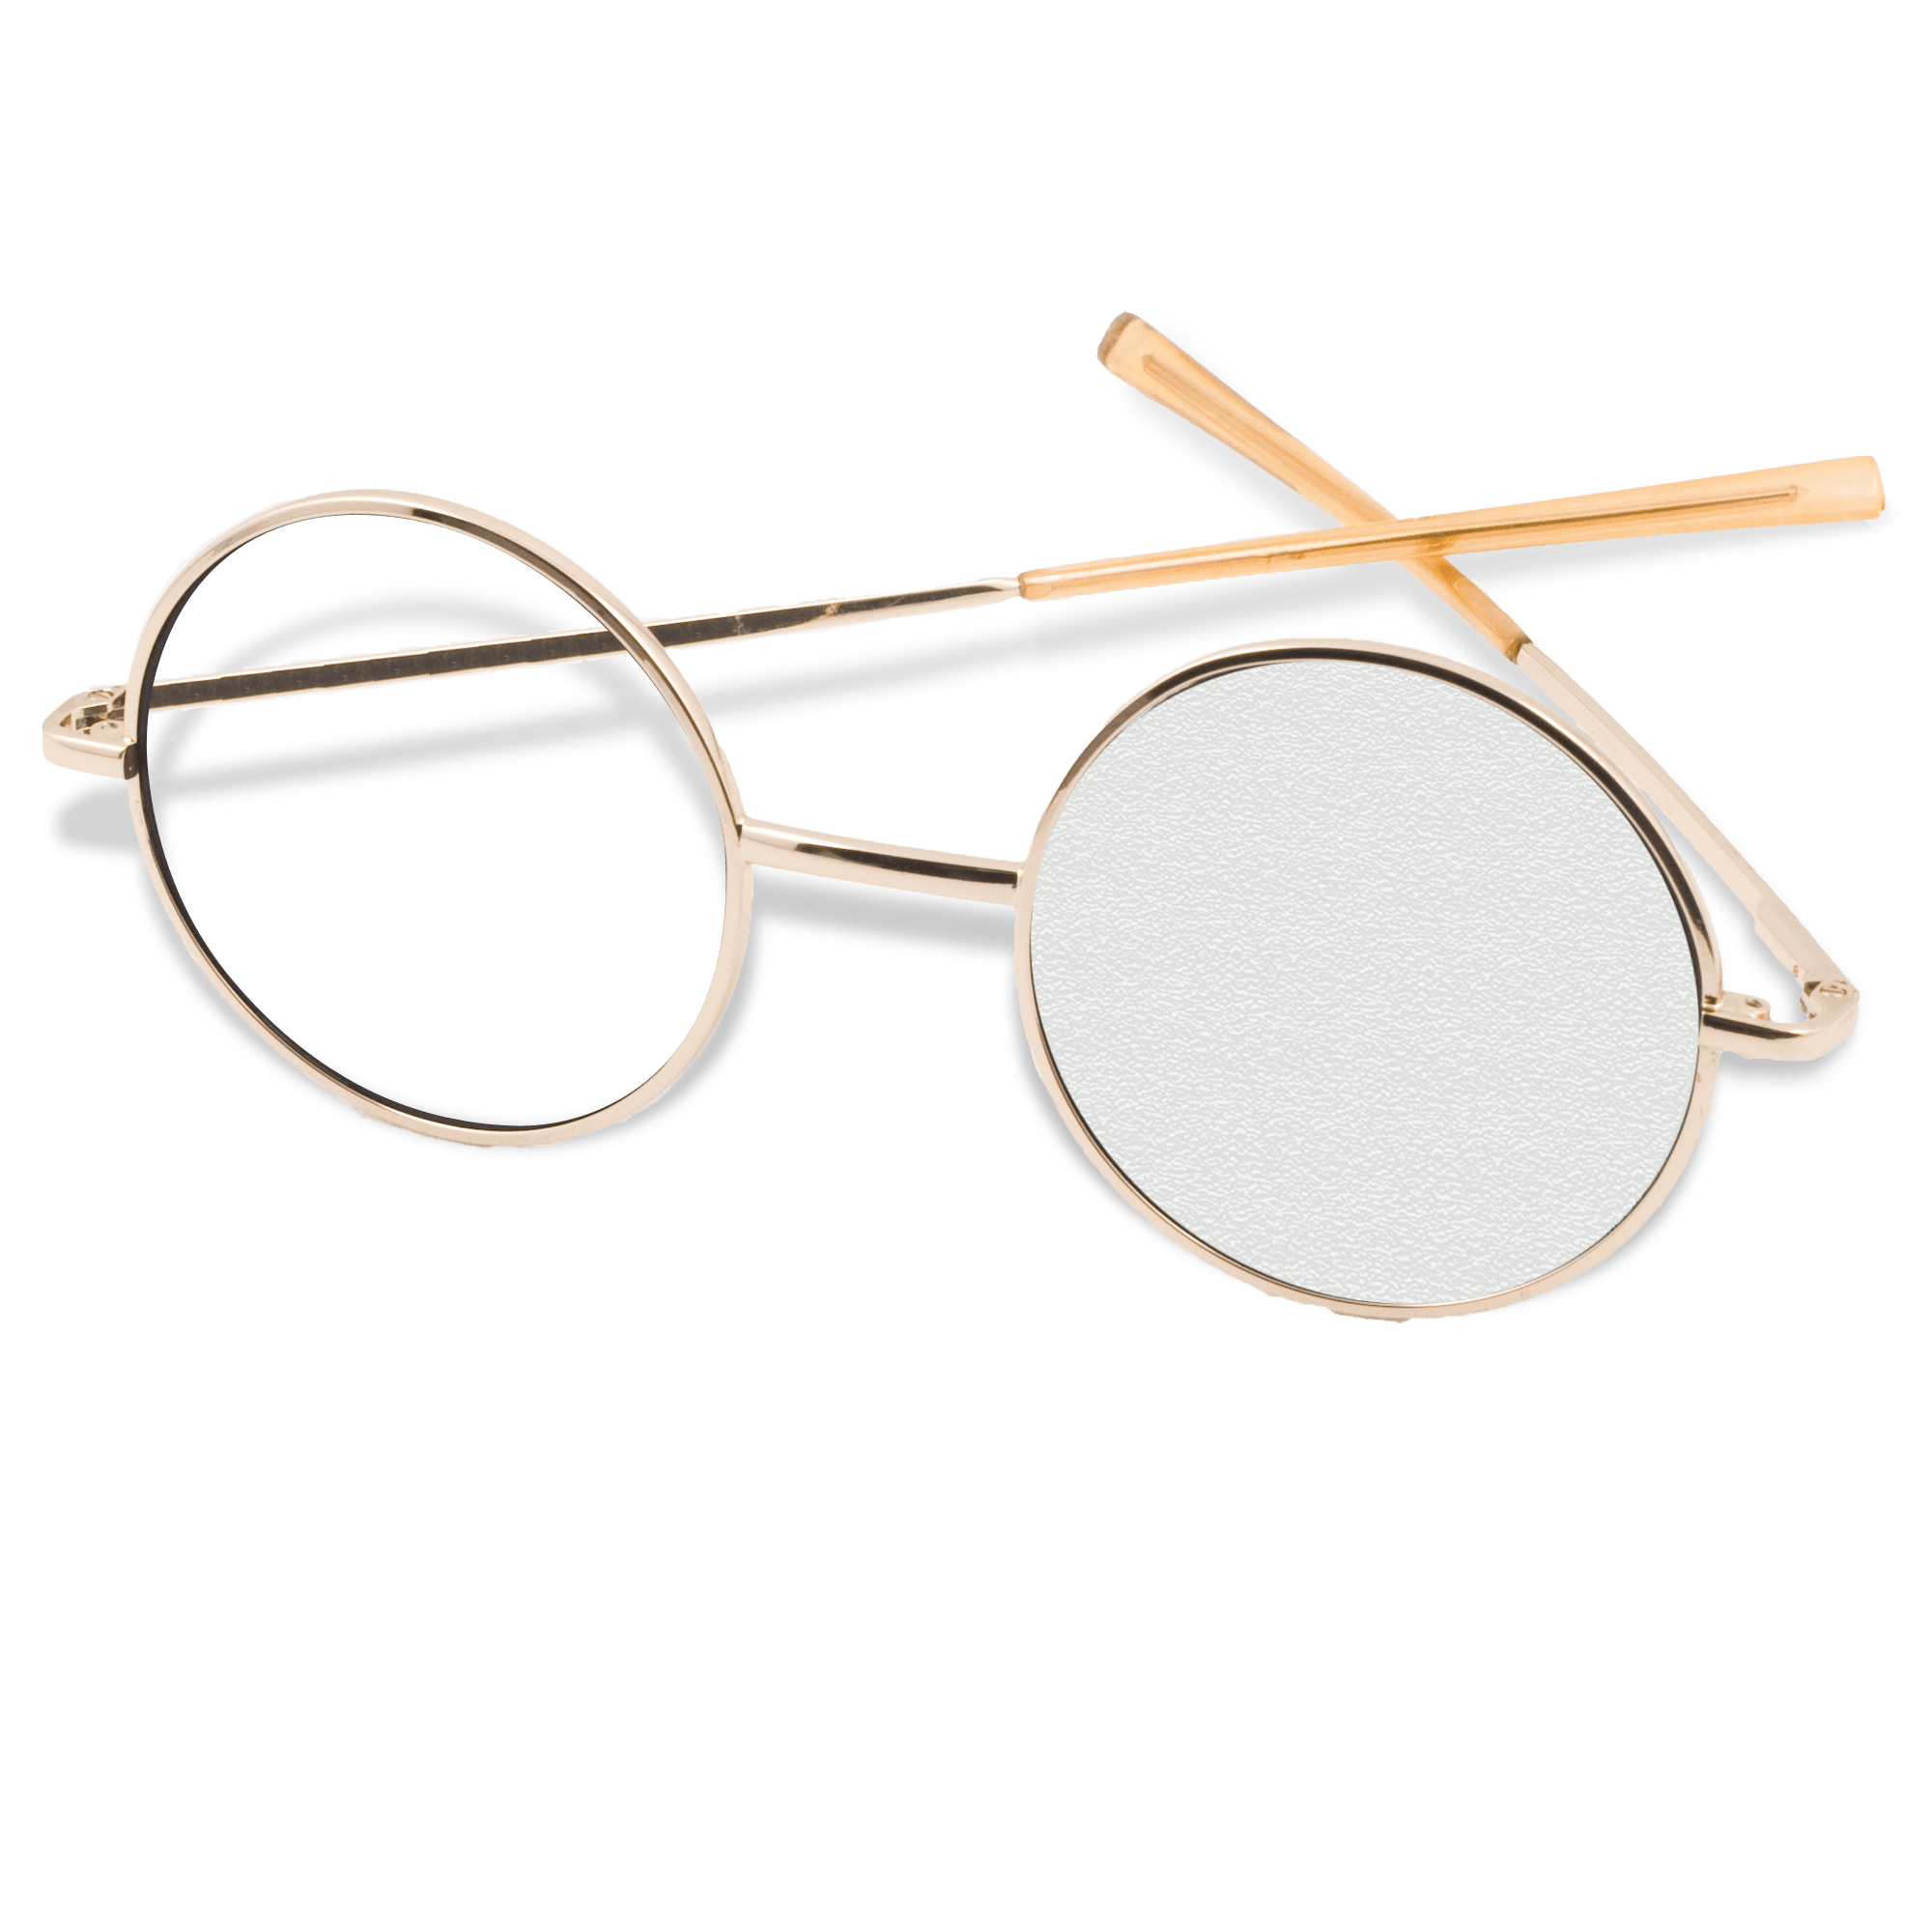 Good-Lite Frosted Reversible Occluding Glasses